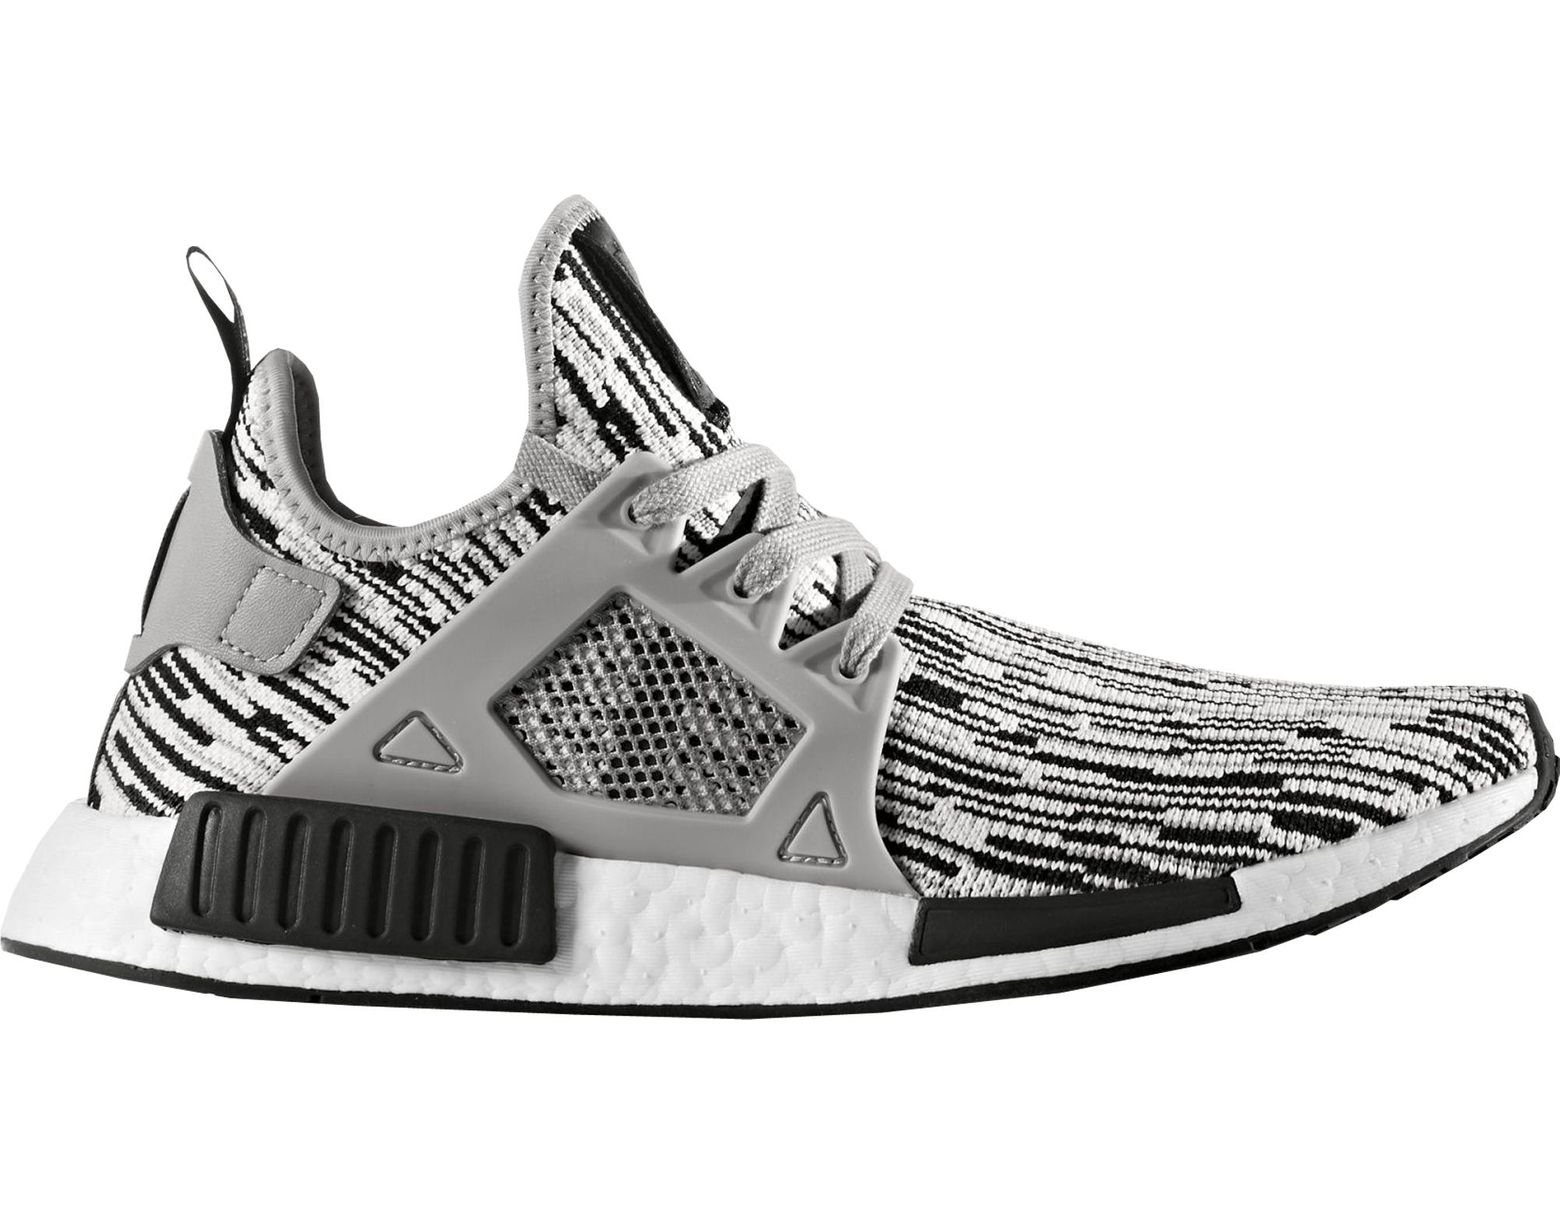 Adidas Nmd Xr1 White Pearl Gray Pk Hers Trainers Offspring